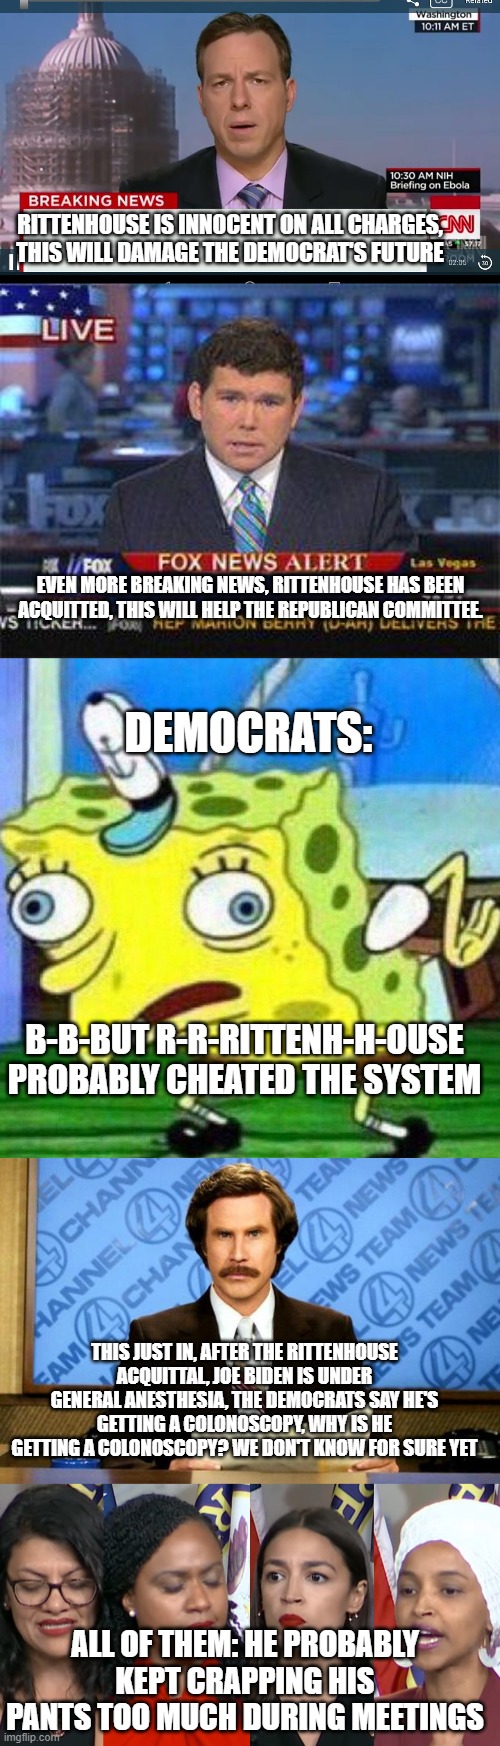 Joe Biden and the Rats are S-W-E-A-T-I-N-G! |  RITTENHOUSE IS INNOCENT ON ALL CHARGES, THIS WILL DAMAGE THE DEMOCRAT'S FUTURE; EVEN MORE BREAKING NEWS, RITTENHOUSE HAS BEEN ACQUITTED, THIS WILL HELP THE REPUBLICAN COMMITTEE. DEMOCRATS:; B-B-BUT R-R-RITTENH-H-OUSE PROBABLY CHEATED THE SYSTEM; THIS JUST IN, AFTER THE RITTENHOUSE ACQUITTAL, JOE BIDEN IS UNDER GENERAL ANESTHESIA, THE DEMOCRATS SAY HE'S GETTING A COLONOSCOPY, WHY IS HE GETTING A COLONOSCOPY? WE DON'T KNOW FOR SURE YET; ALL OF THEM: HE PROBABLY KEPT CRAPPING HIS PANTS TOO MUCH DURING MEETINGS | image tagged in cnn breaking news template,fox news alert,triggerpaul,breaking news,aoc squad,memes | made w/ Imgflip meme maker